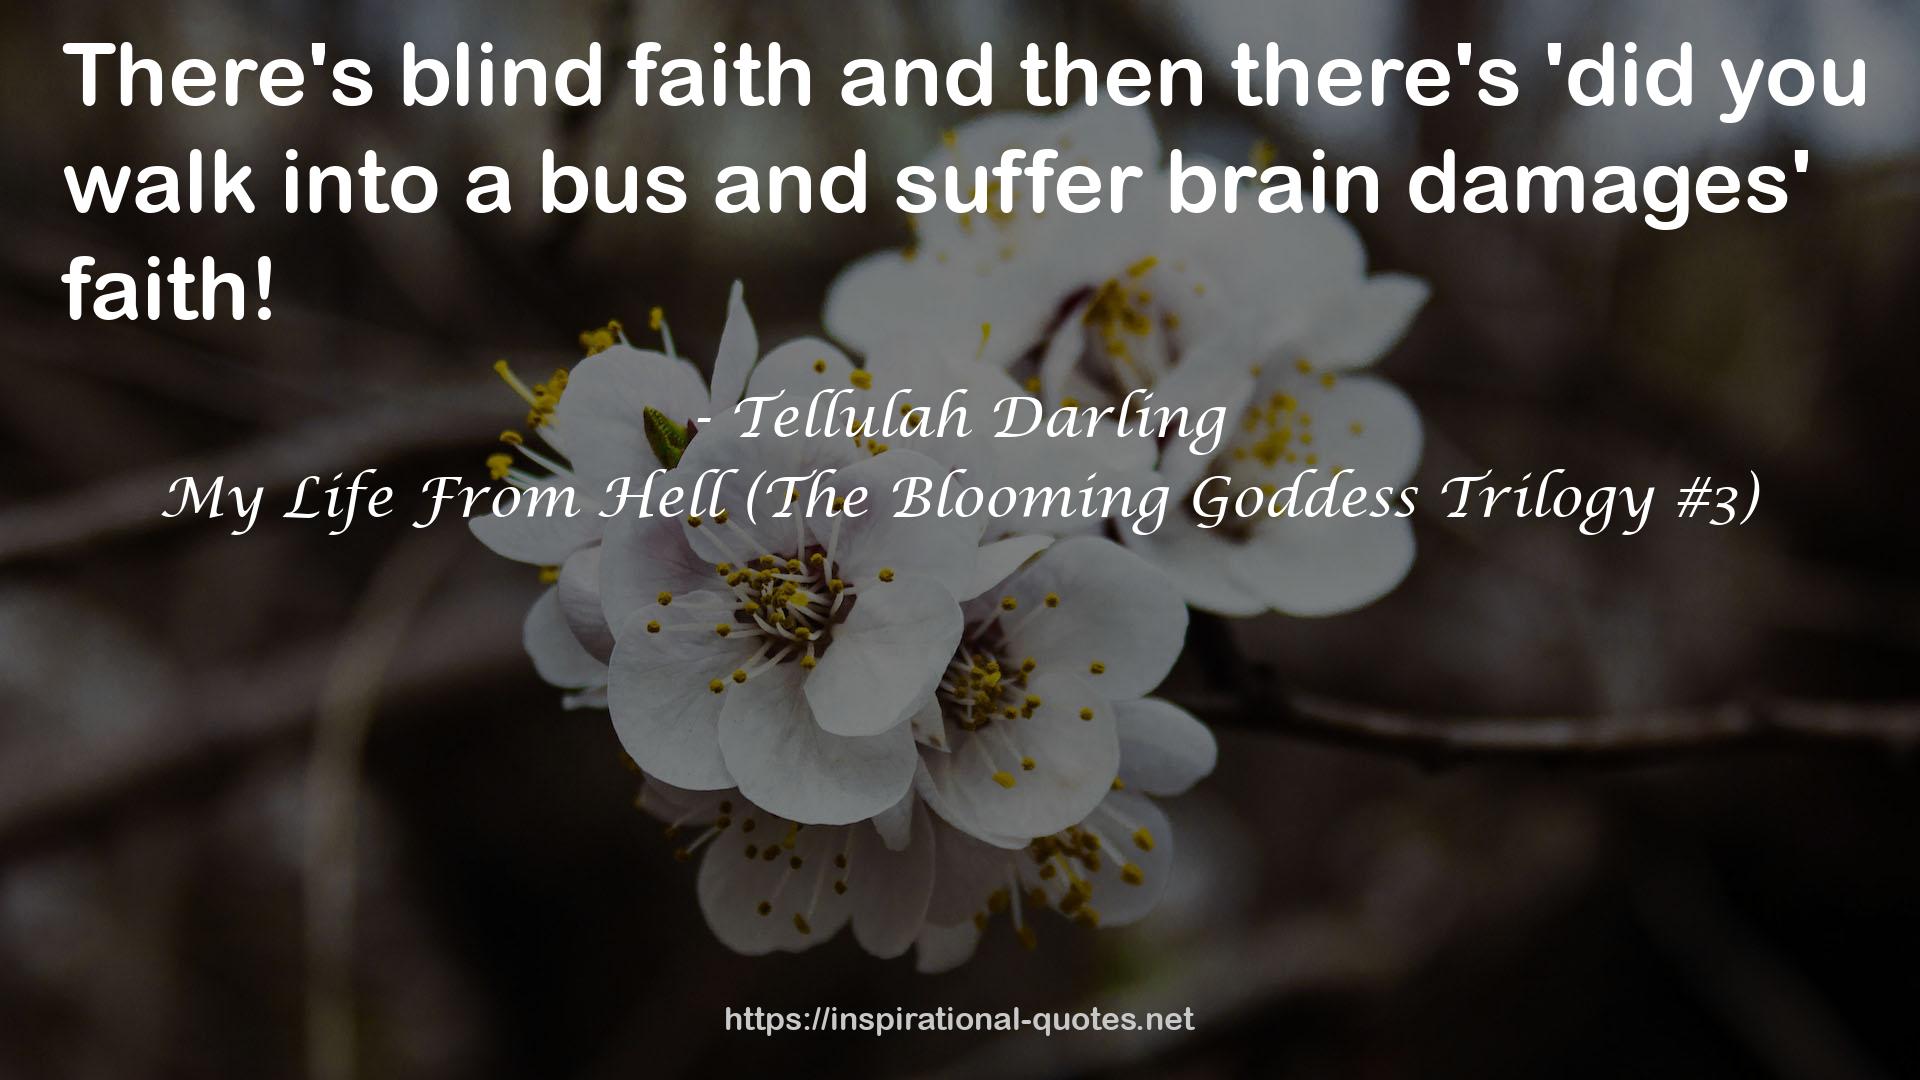 My Life From Hell (The Blooming Goddess Trilogy #3) QUOTES